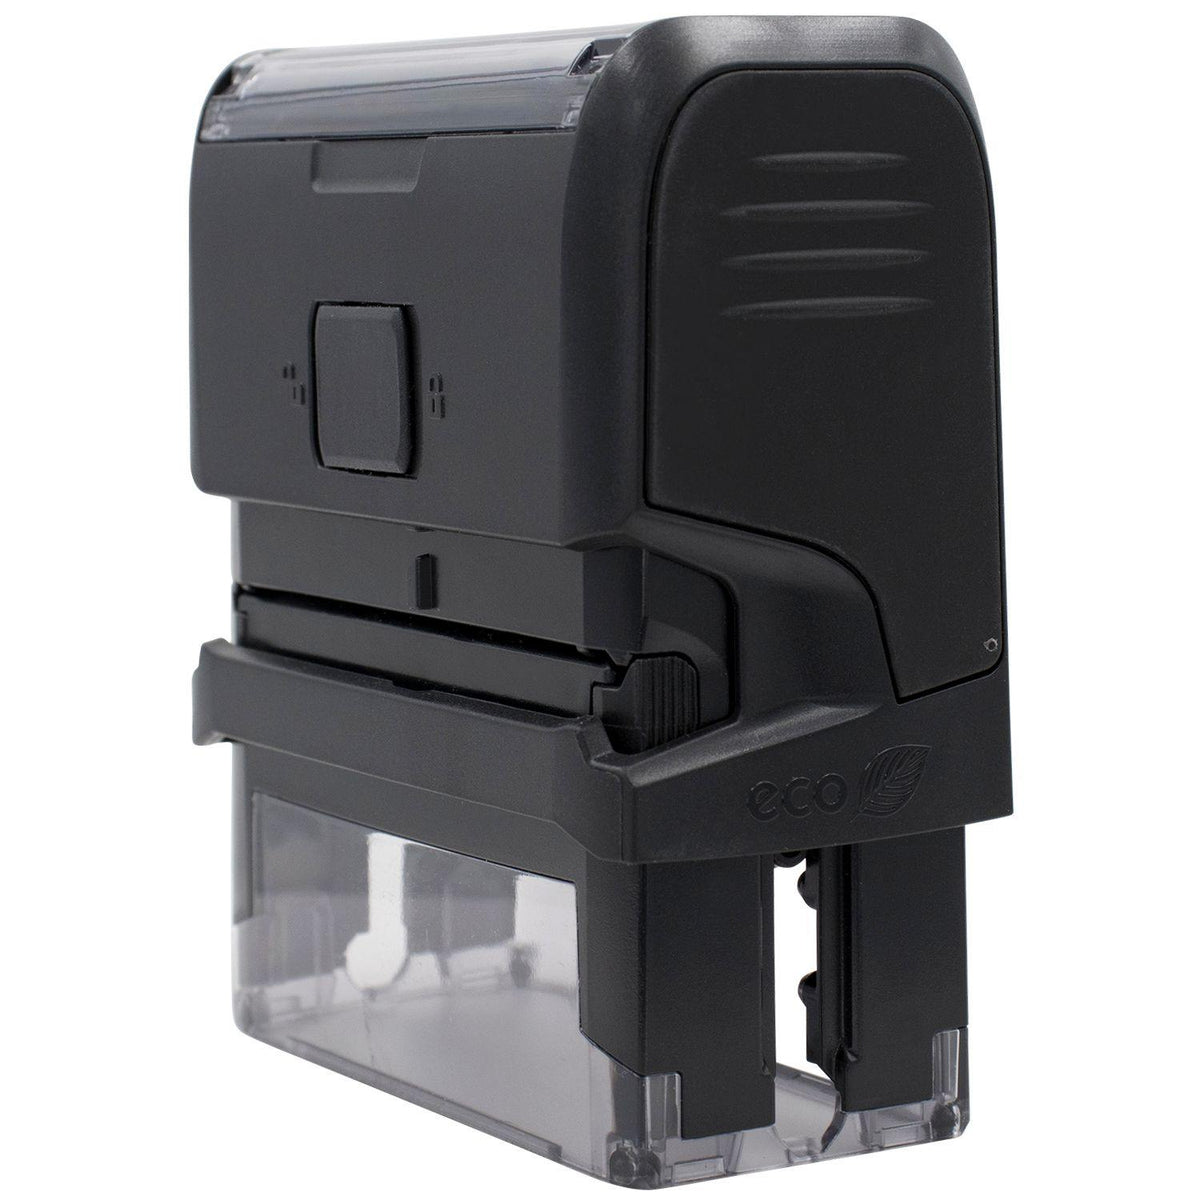 Self-Inking Bold Recibido Stamp - Engineer Seal Stamps - Brand_Trodat, Impression Size_Small, Stamp Type_Self-Inking Stamp, Type of Use_Office, Type of Use_Shipping &amp; Receiving